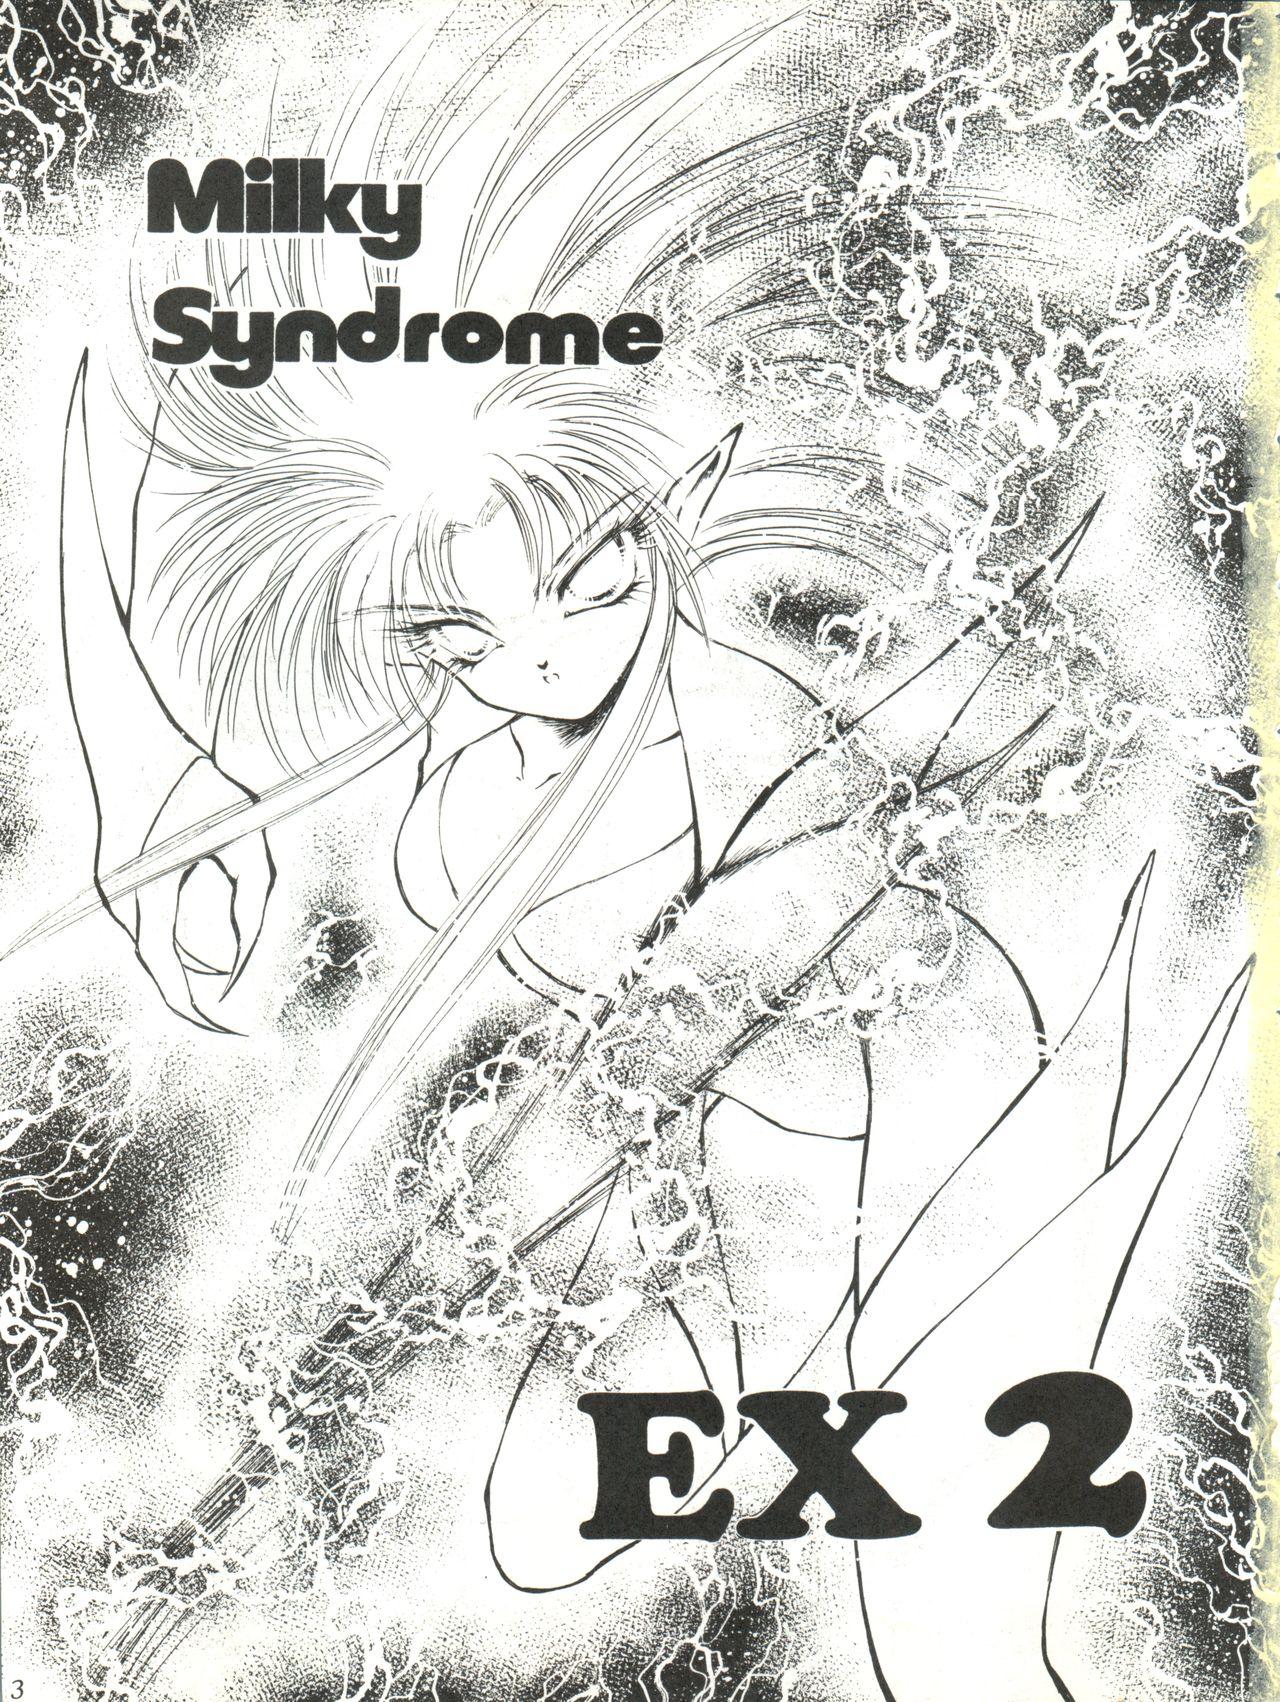 Pale Milky Syndrome EX 2 - Sailor moon Tenchi muyo Pretty sammy Ghost sweeper mikami Ng knight lamune and 40 Teentube - Page 3